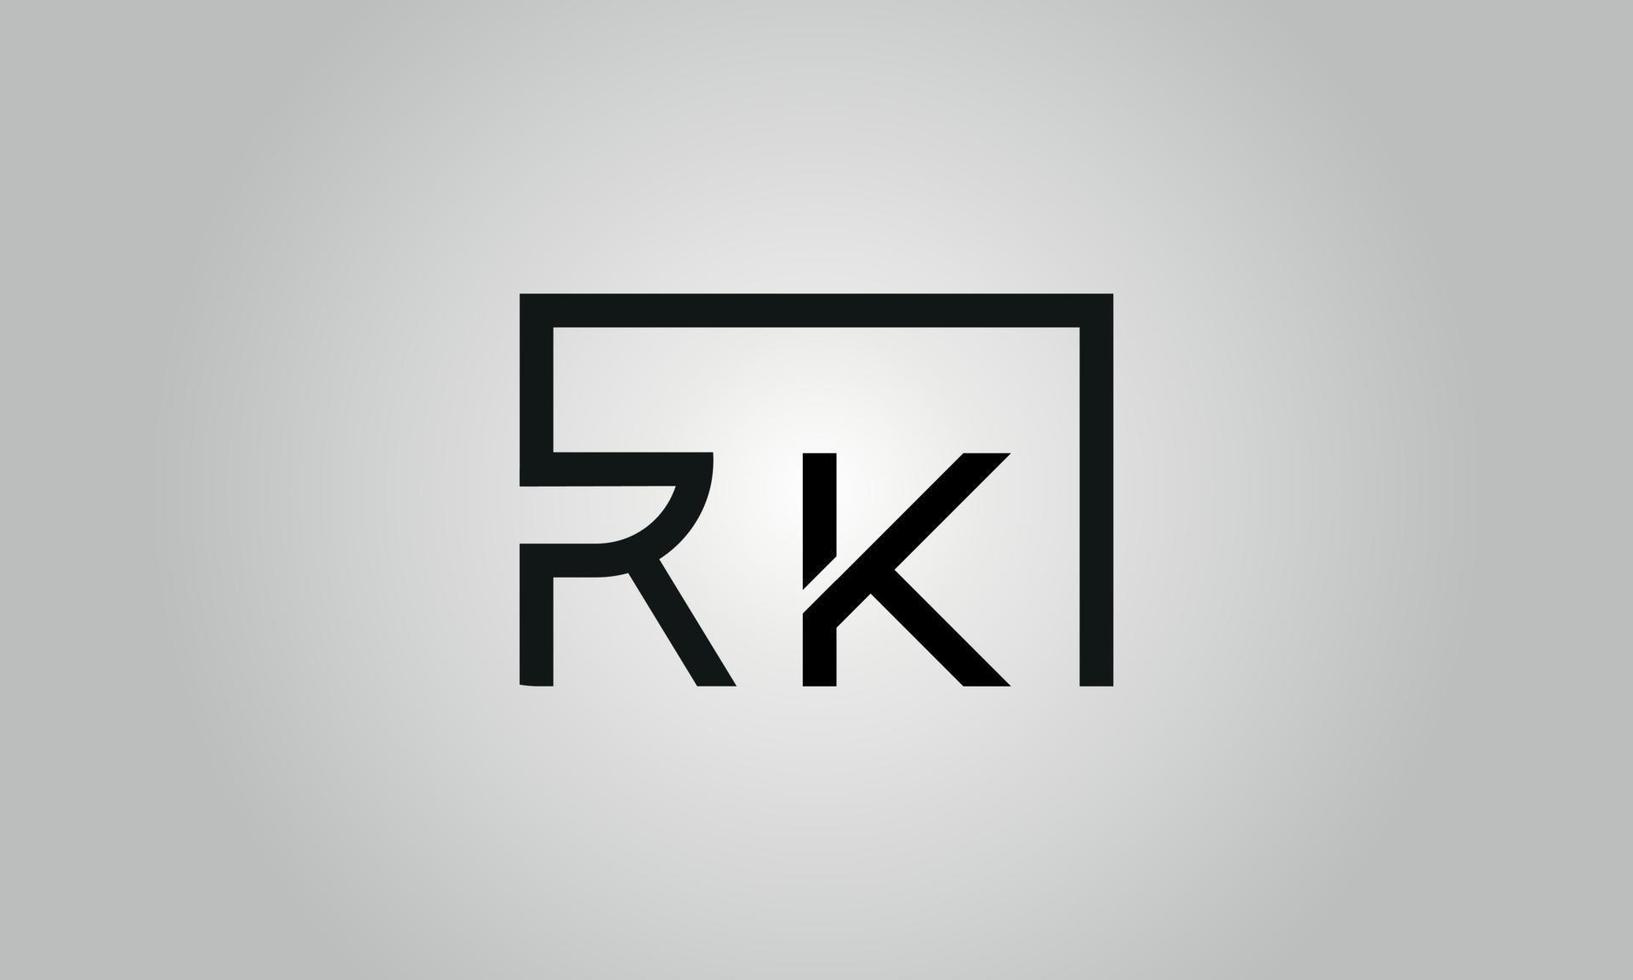 Letter RK logo design. RK logo with square shape in black colors vector free vector template.